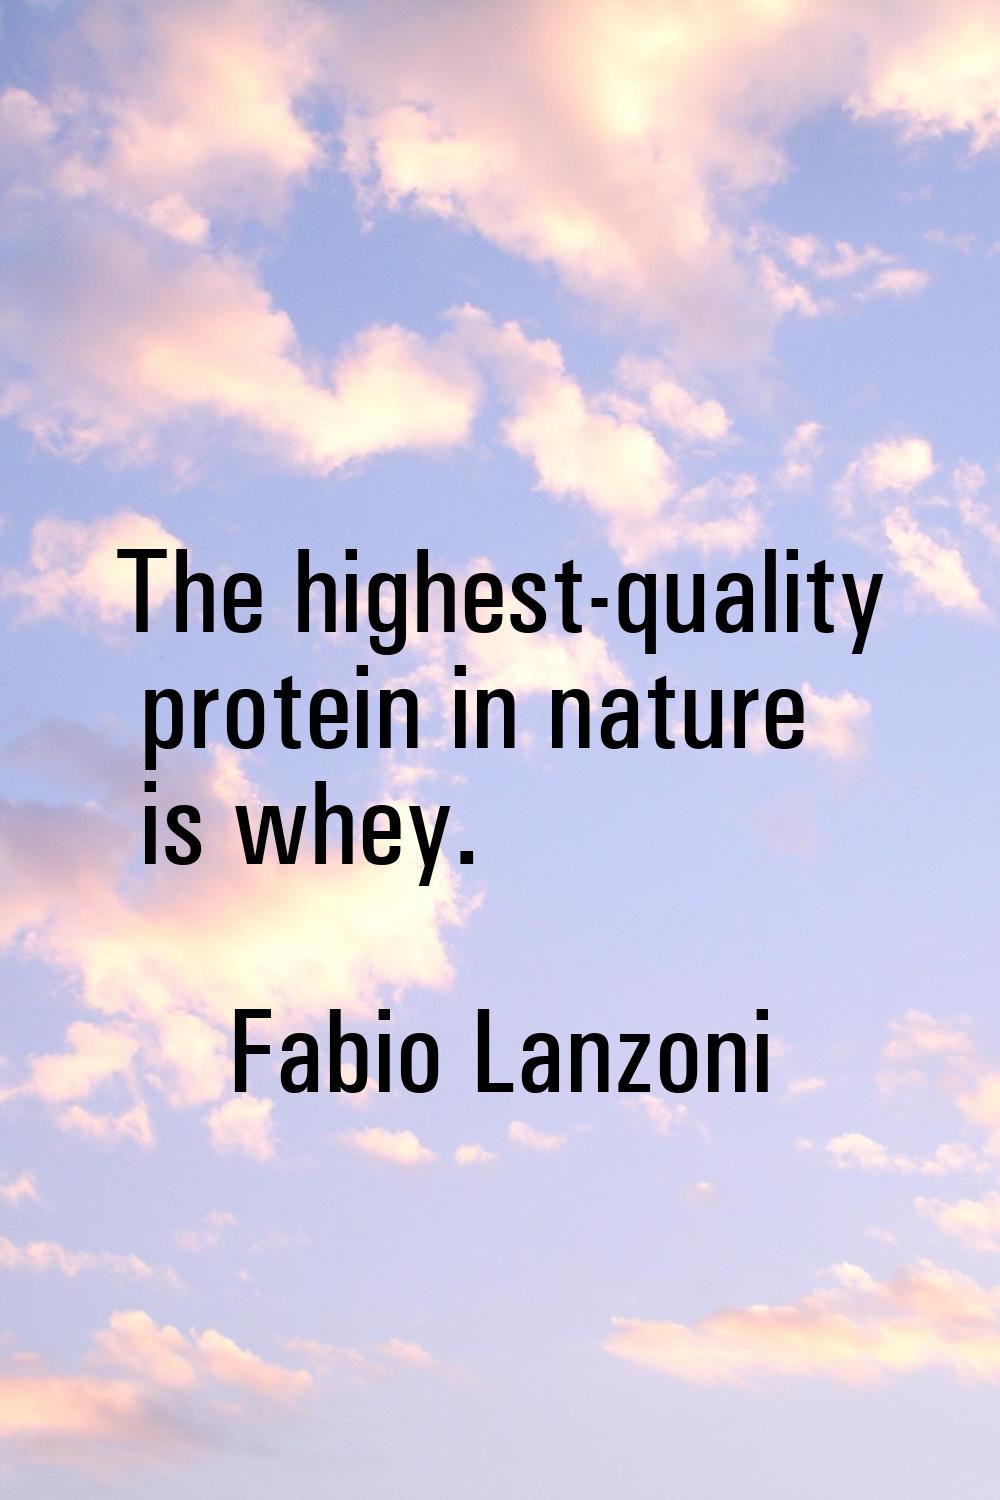 The highest-quality protein in nature is whey.